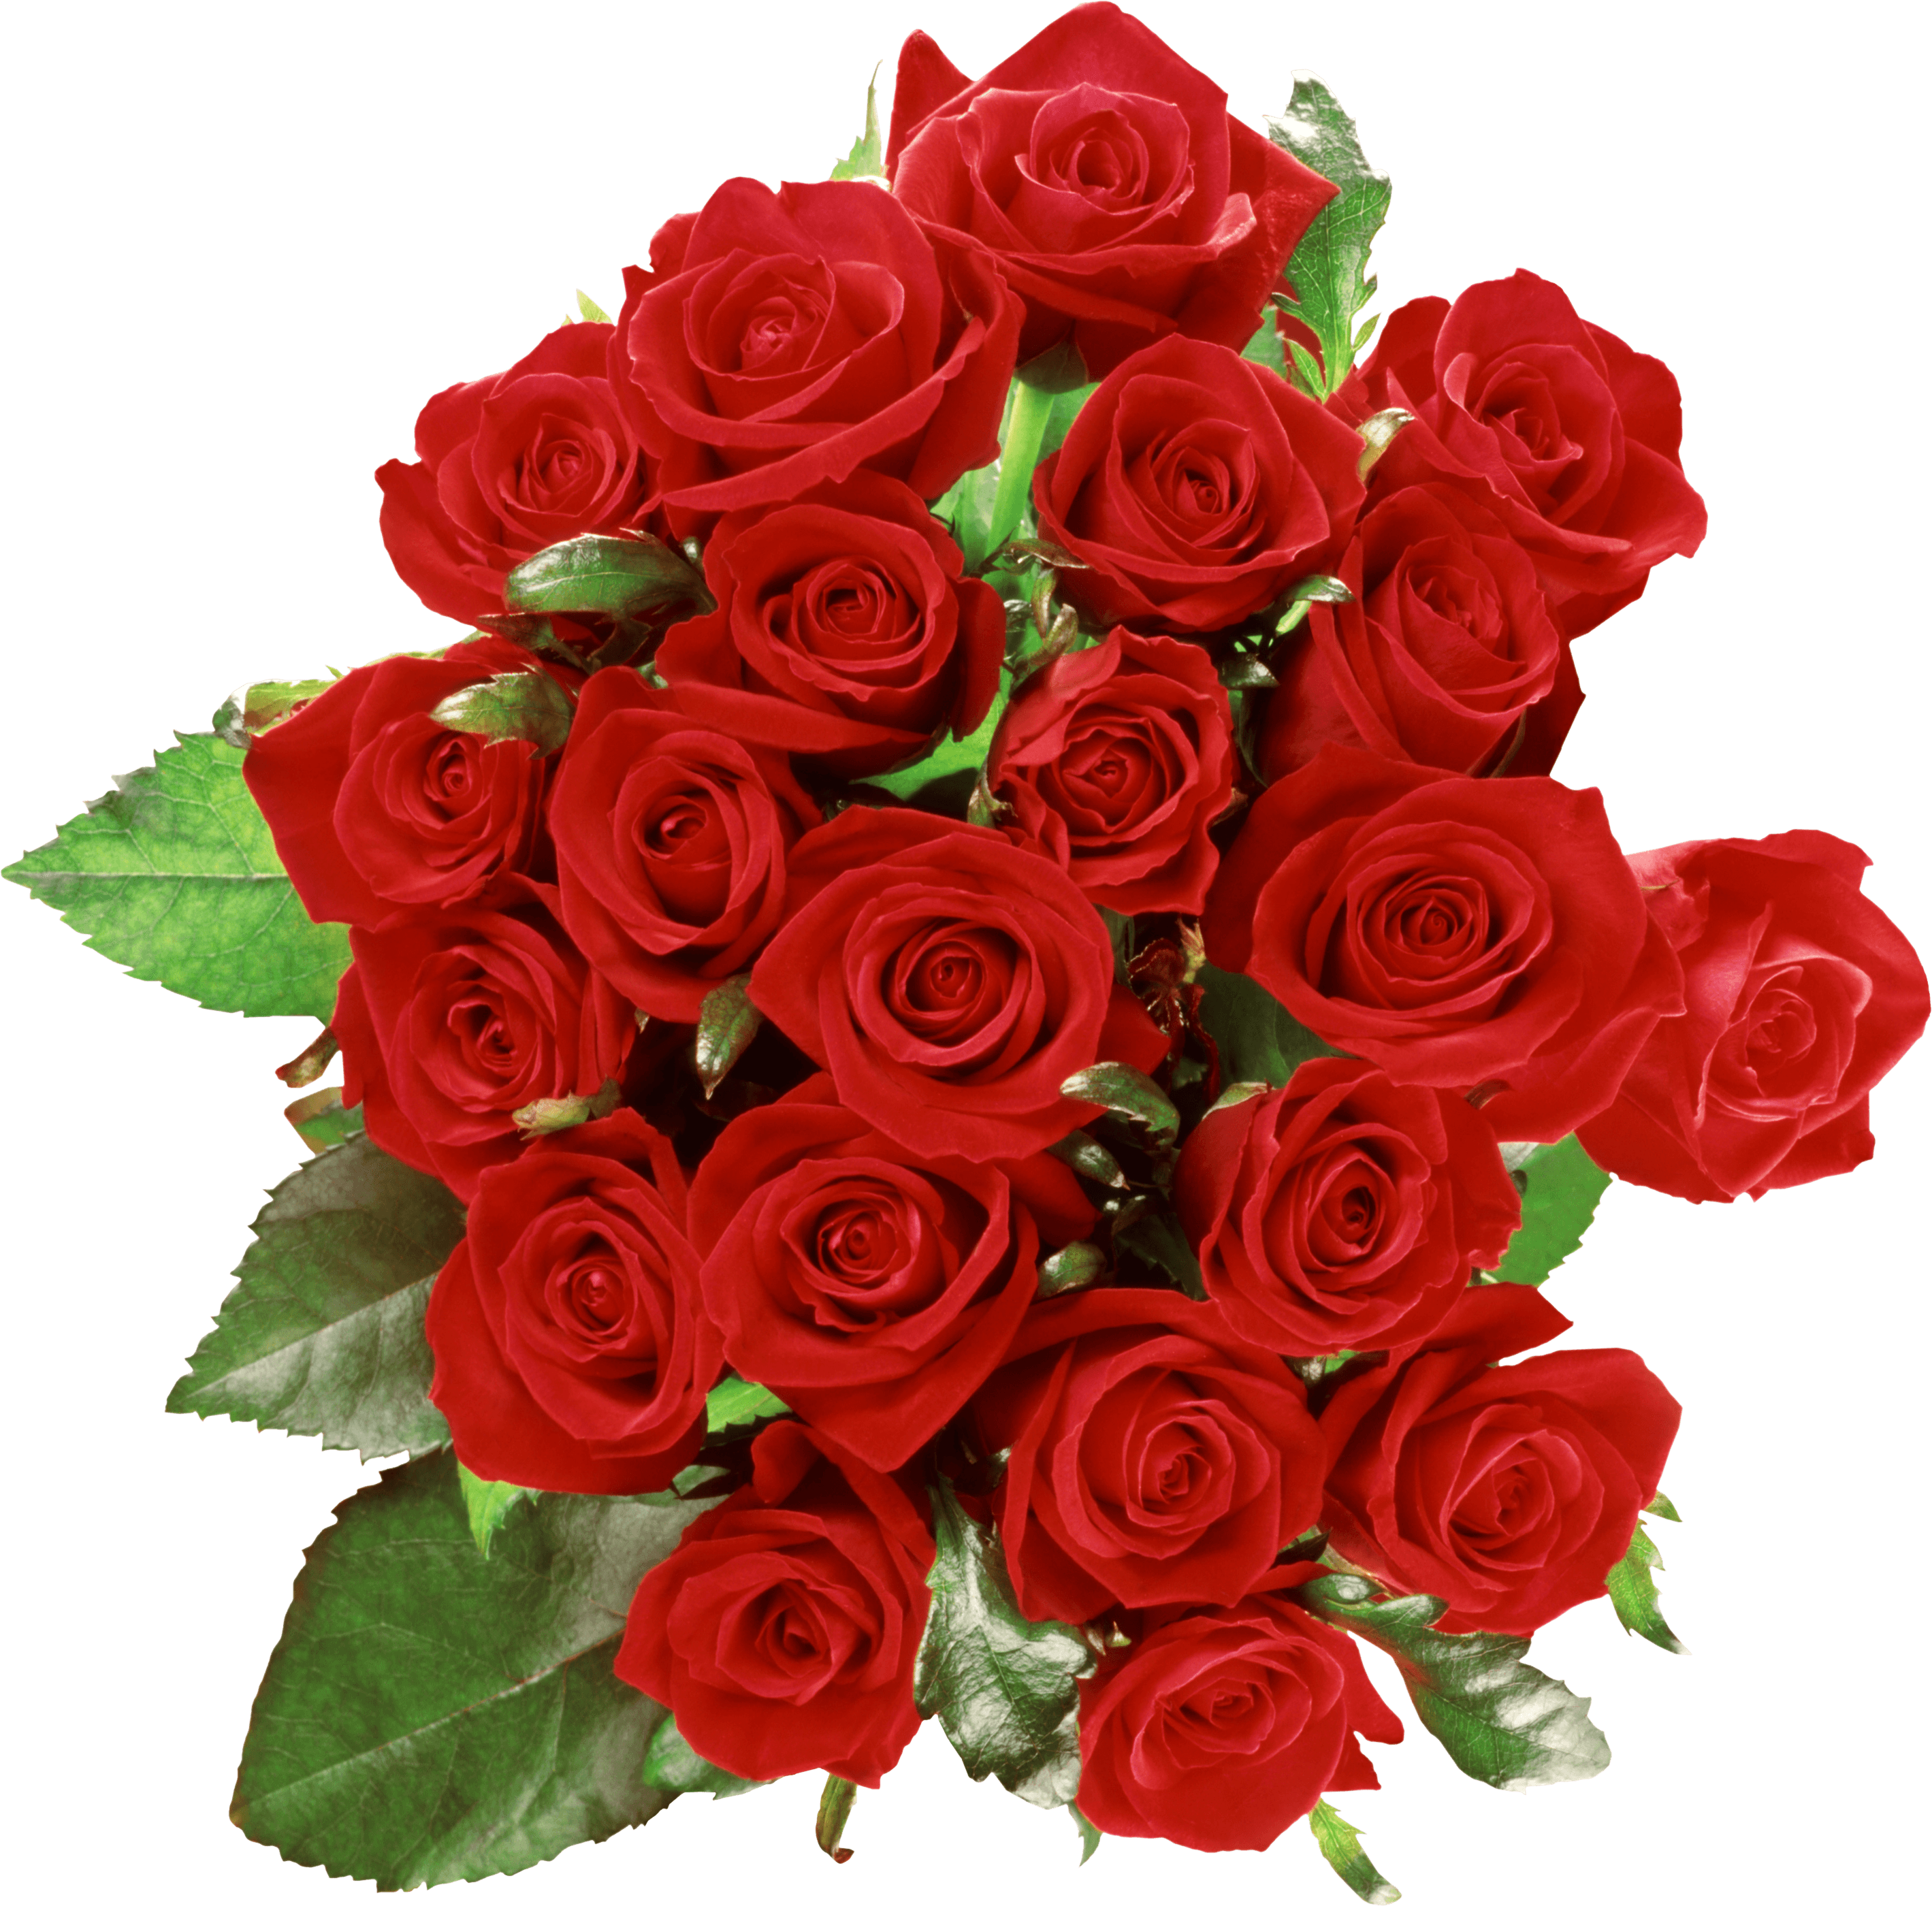 3-bouquet-of-roses-png-image-picture-download.png